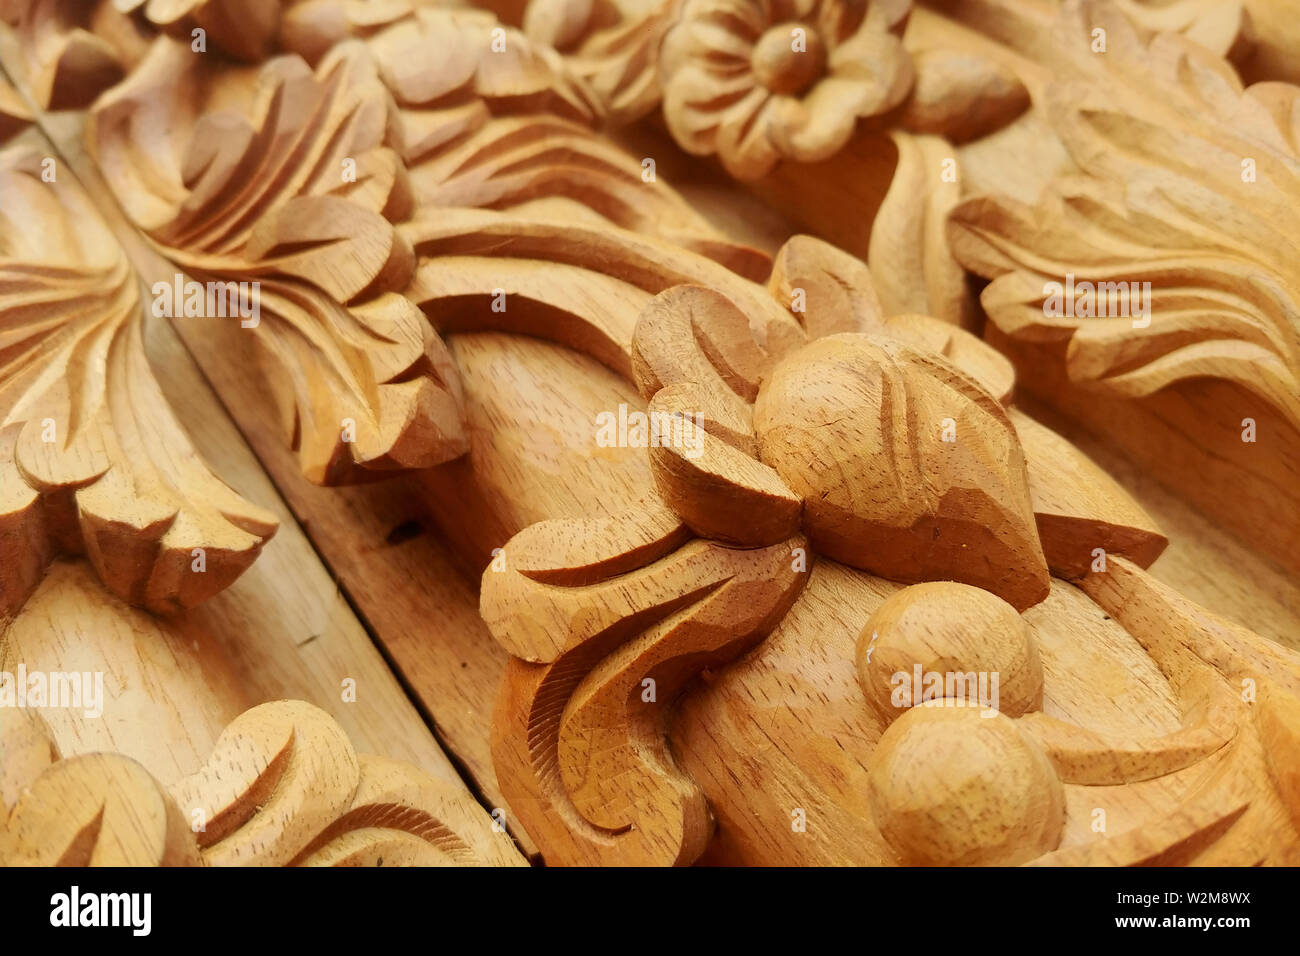 Vietnamese tradition wood engraving products. Location: Giao Thuy district, Nam Dinh,  Vietnam. Stock Photo